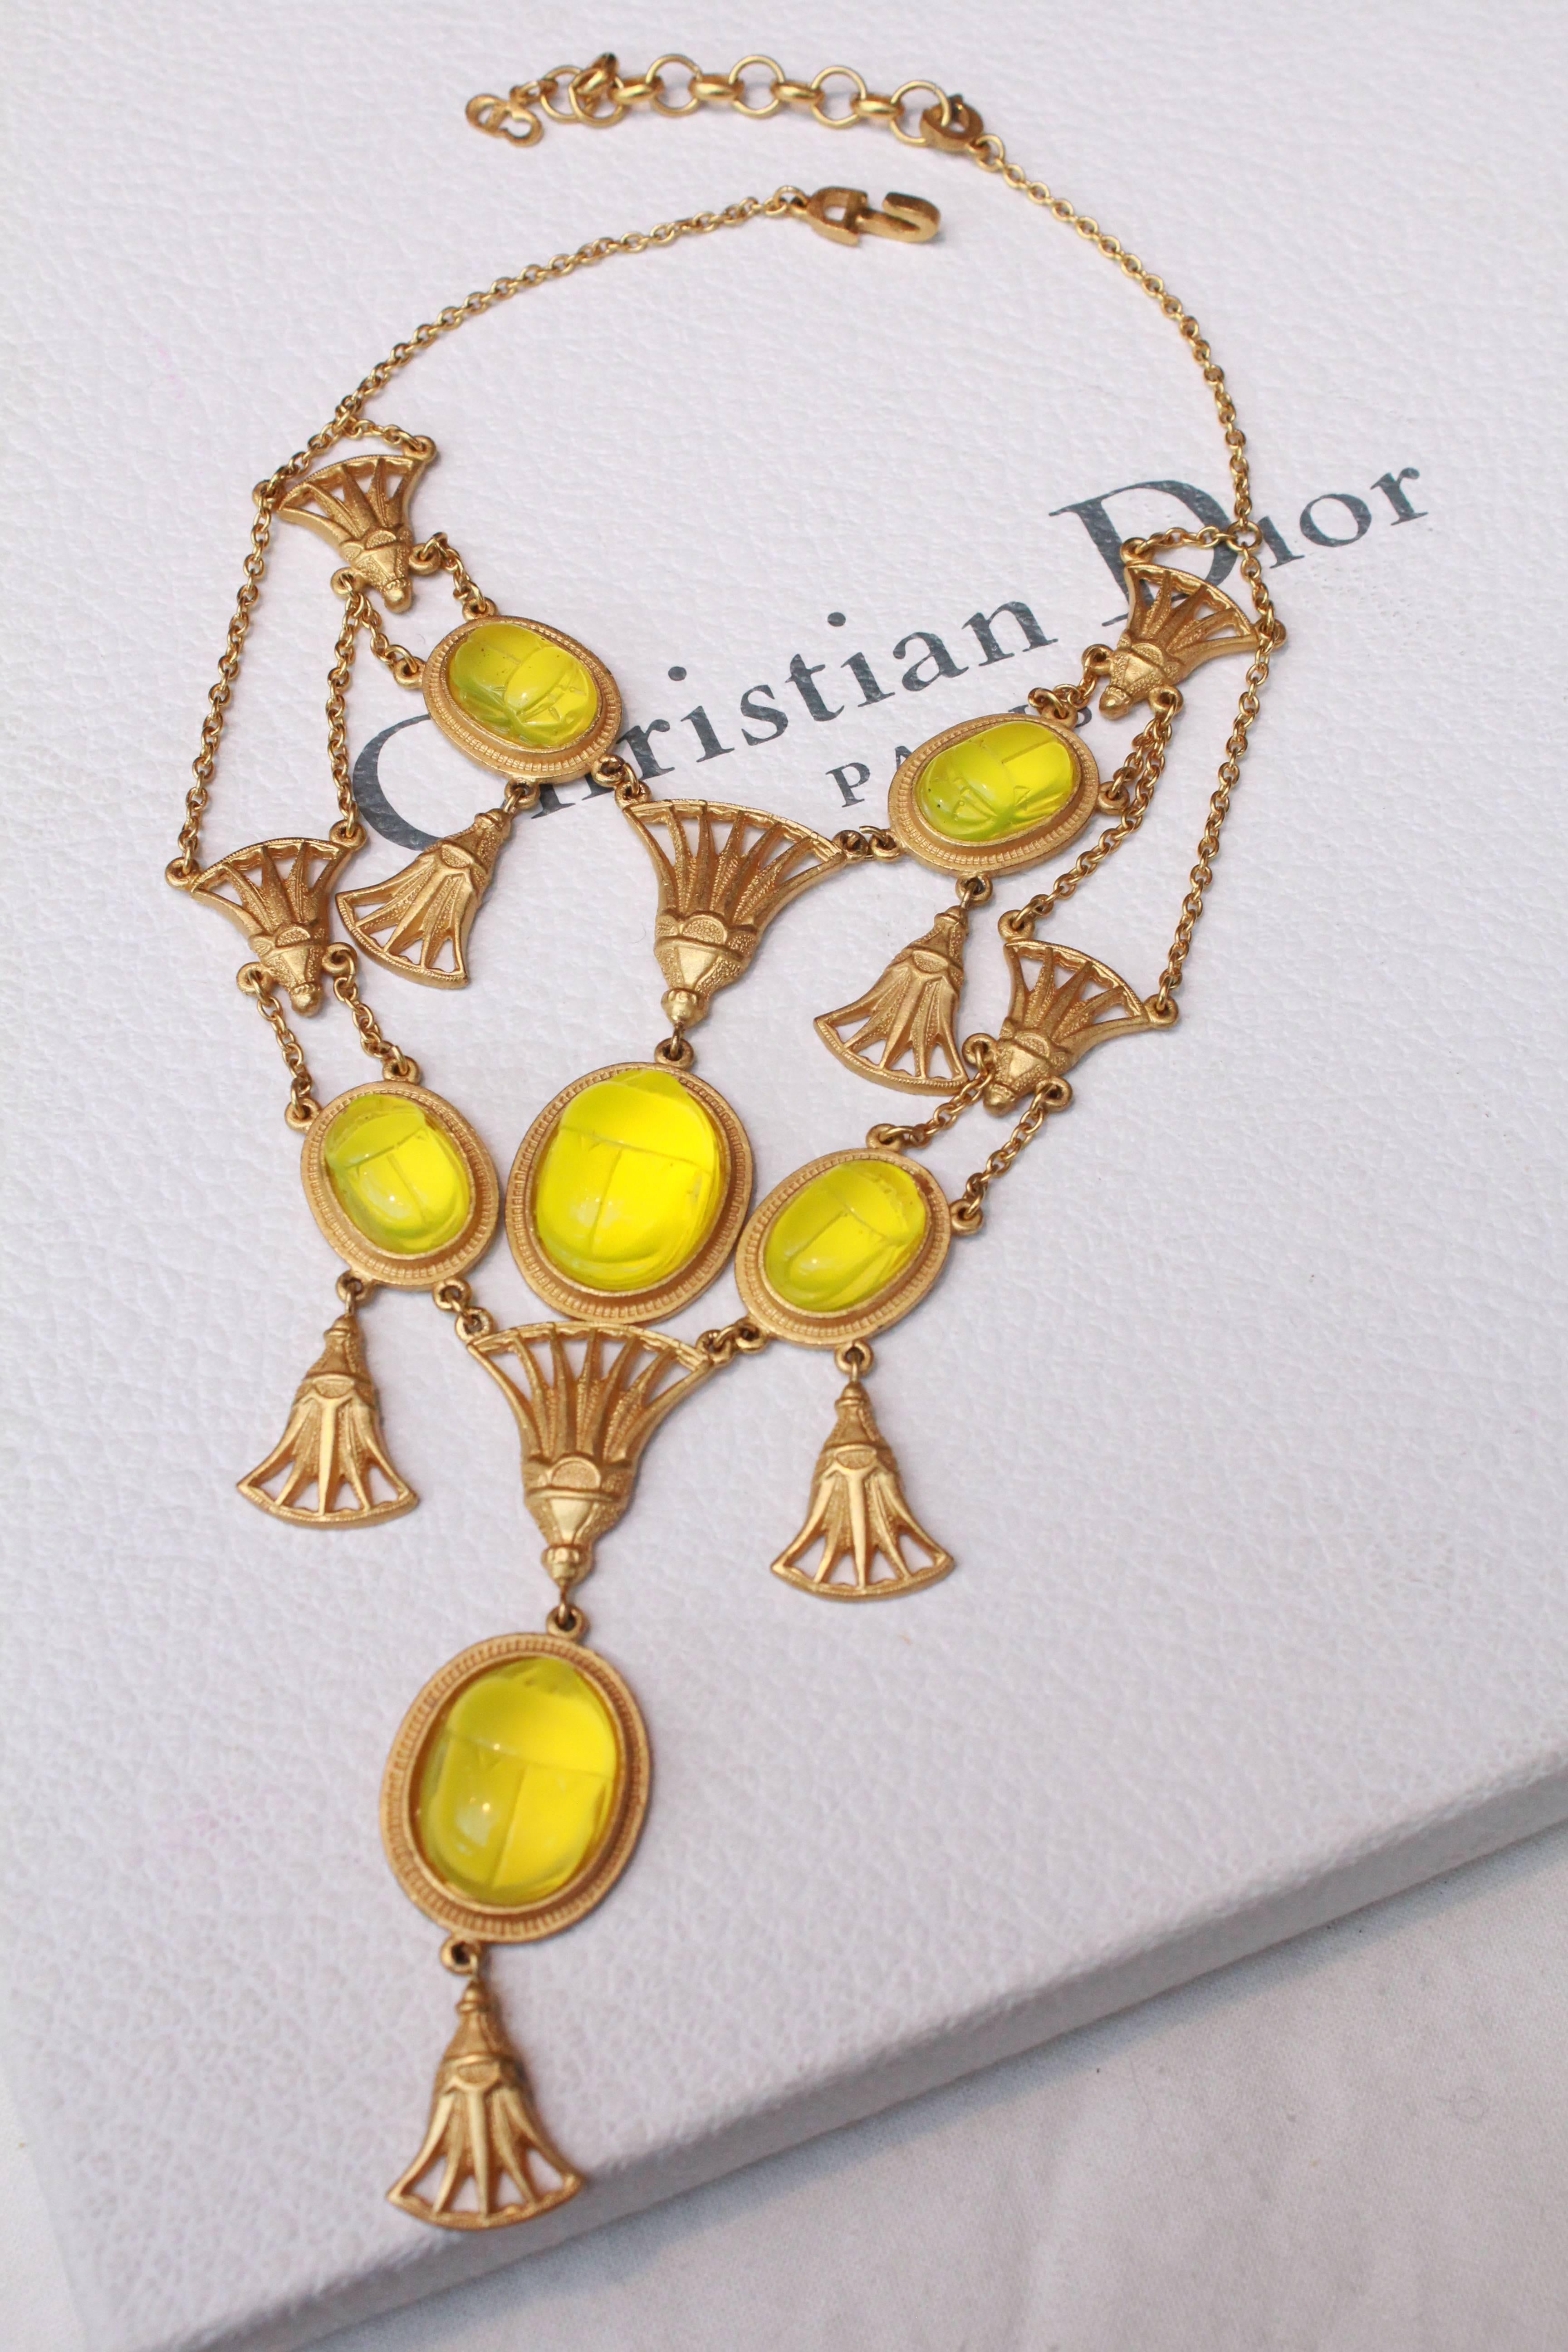 CHRISTIAN DIOR par JOHN GALLIANO  – Gilded metal necklace  inspired by ancient Egypt, composed of chain with yellow resin scarabs and openwork  papyrus flowers. “The Beetle” model. Hook and eye clasp with a small chain bearing the brand